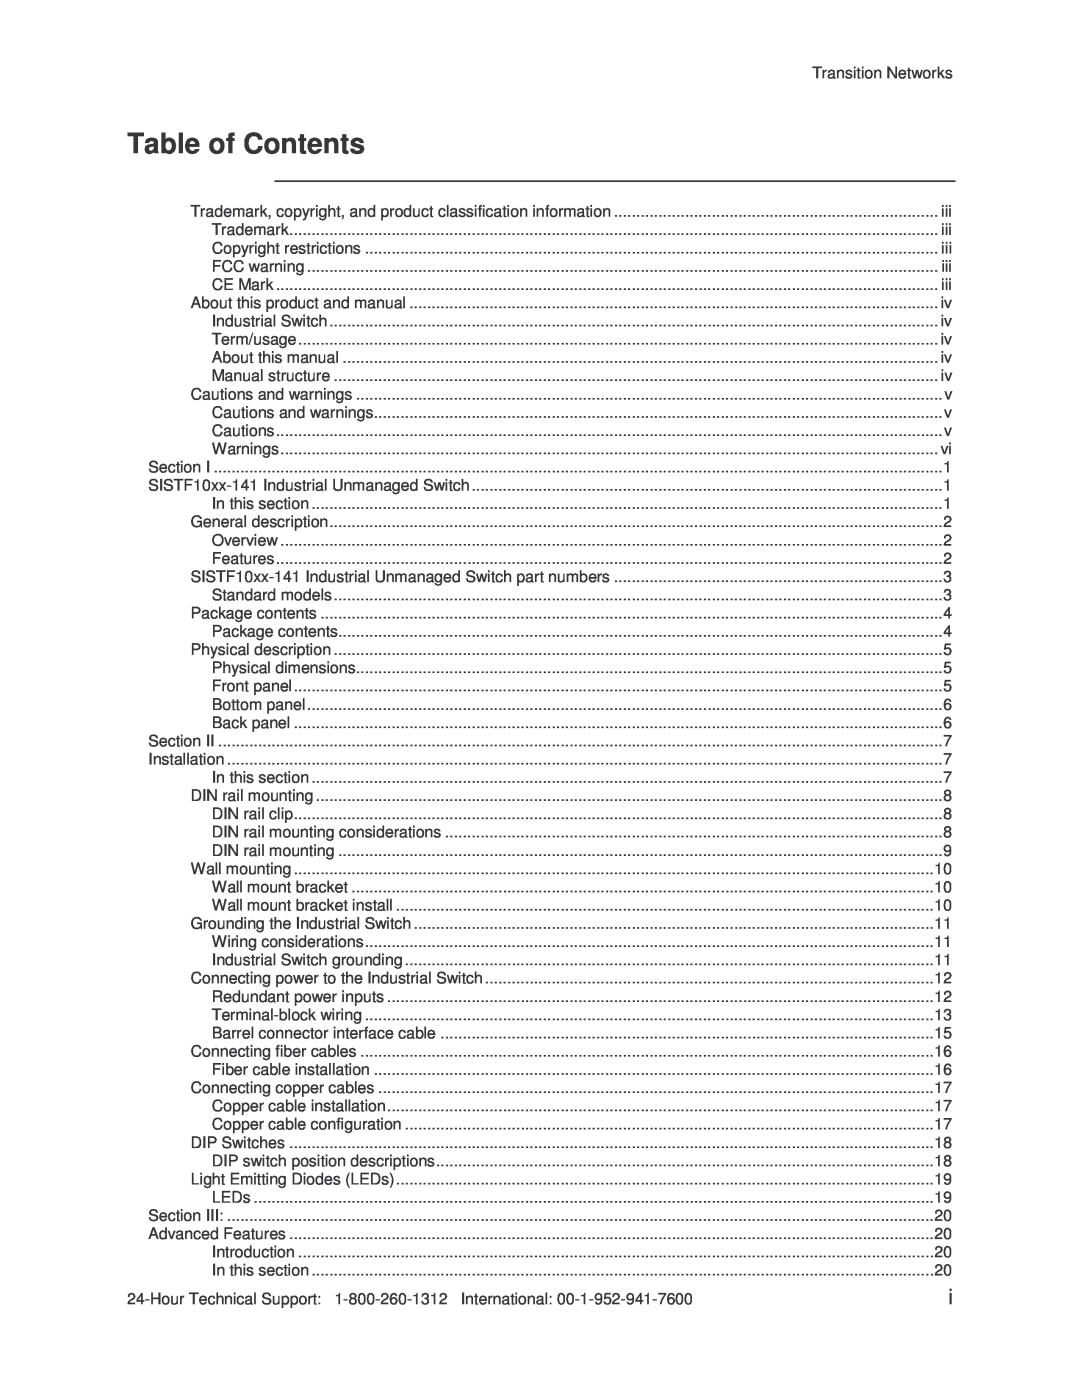 Transition Networks SISTF10xx-141-LR(T) installation manual Table of Contents 